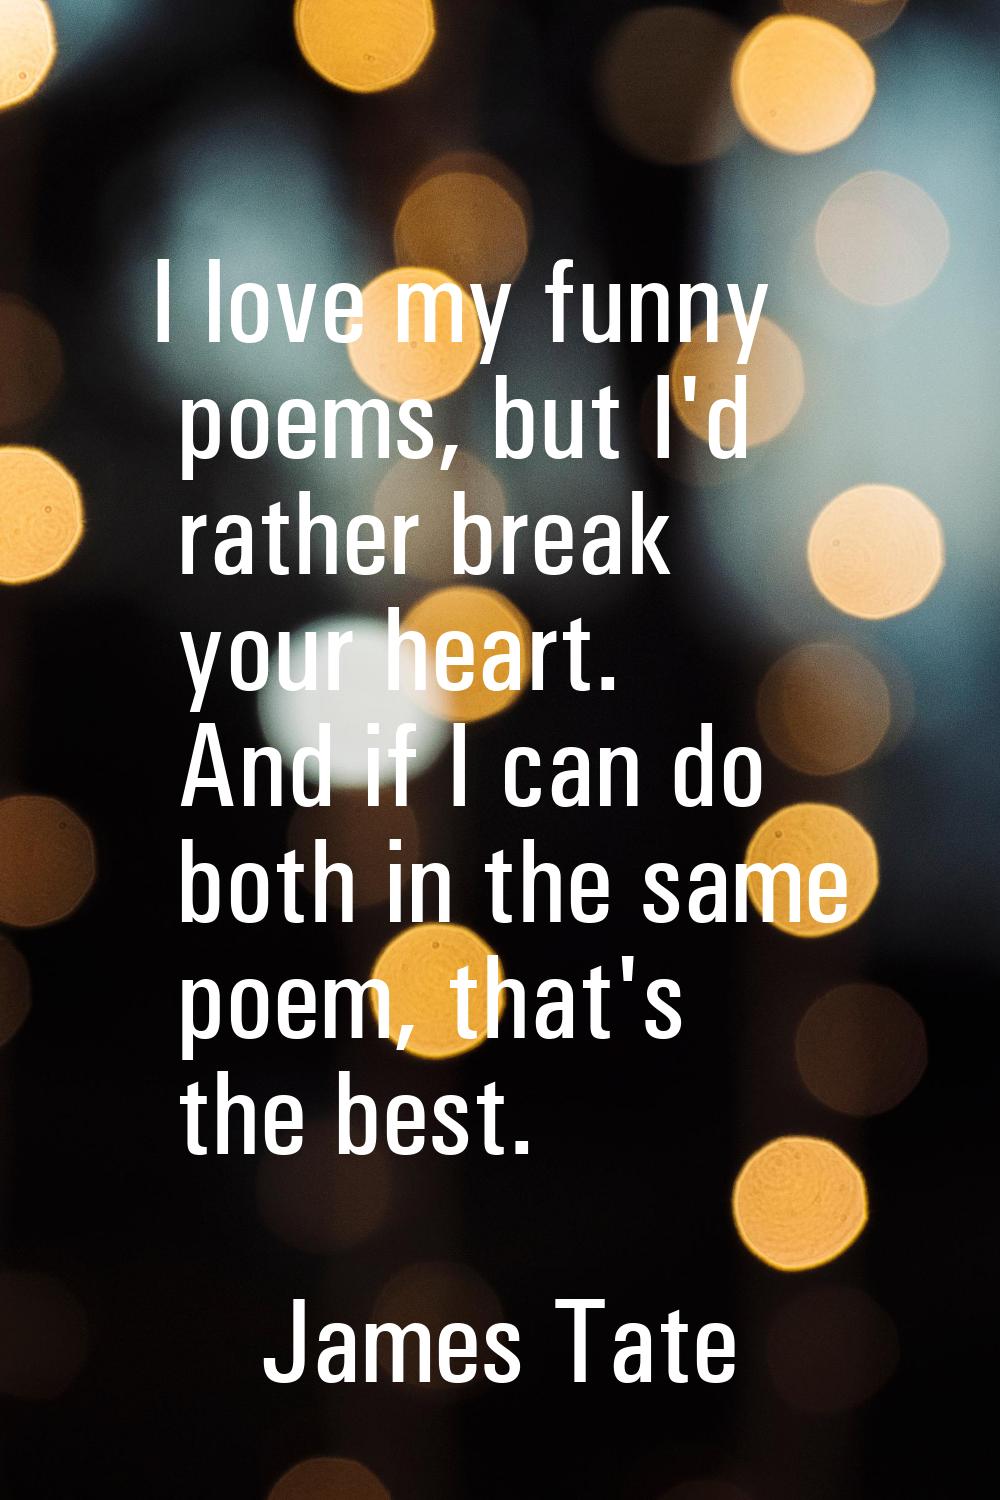 I love my funny poems, but I'd rather break your heart. And if I can do both in the same poem, that